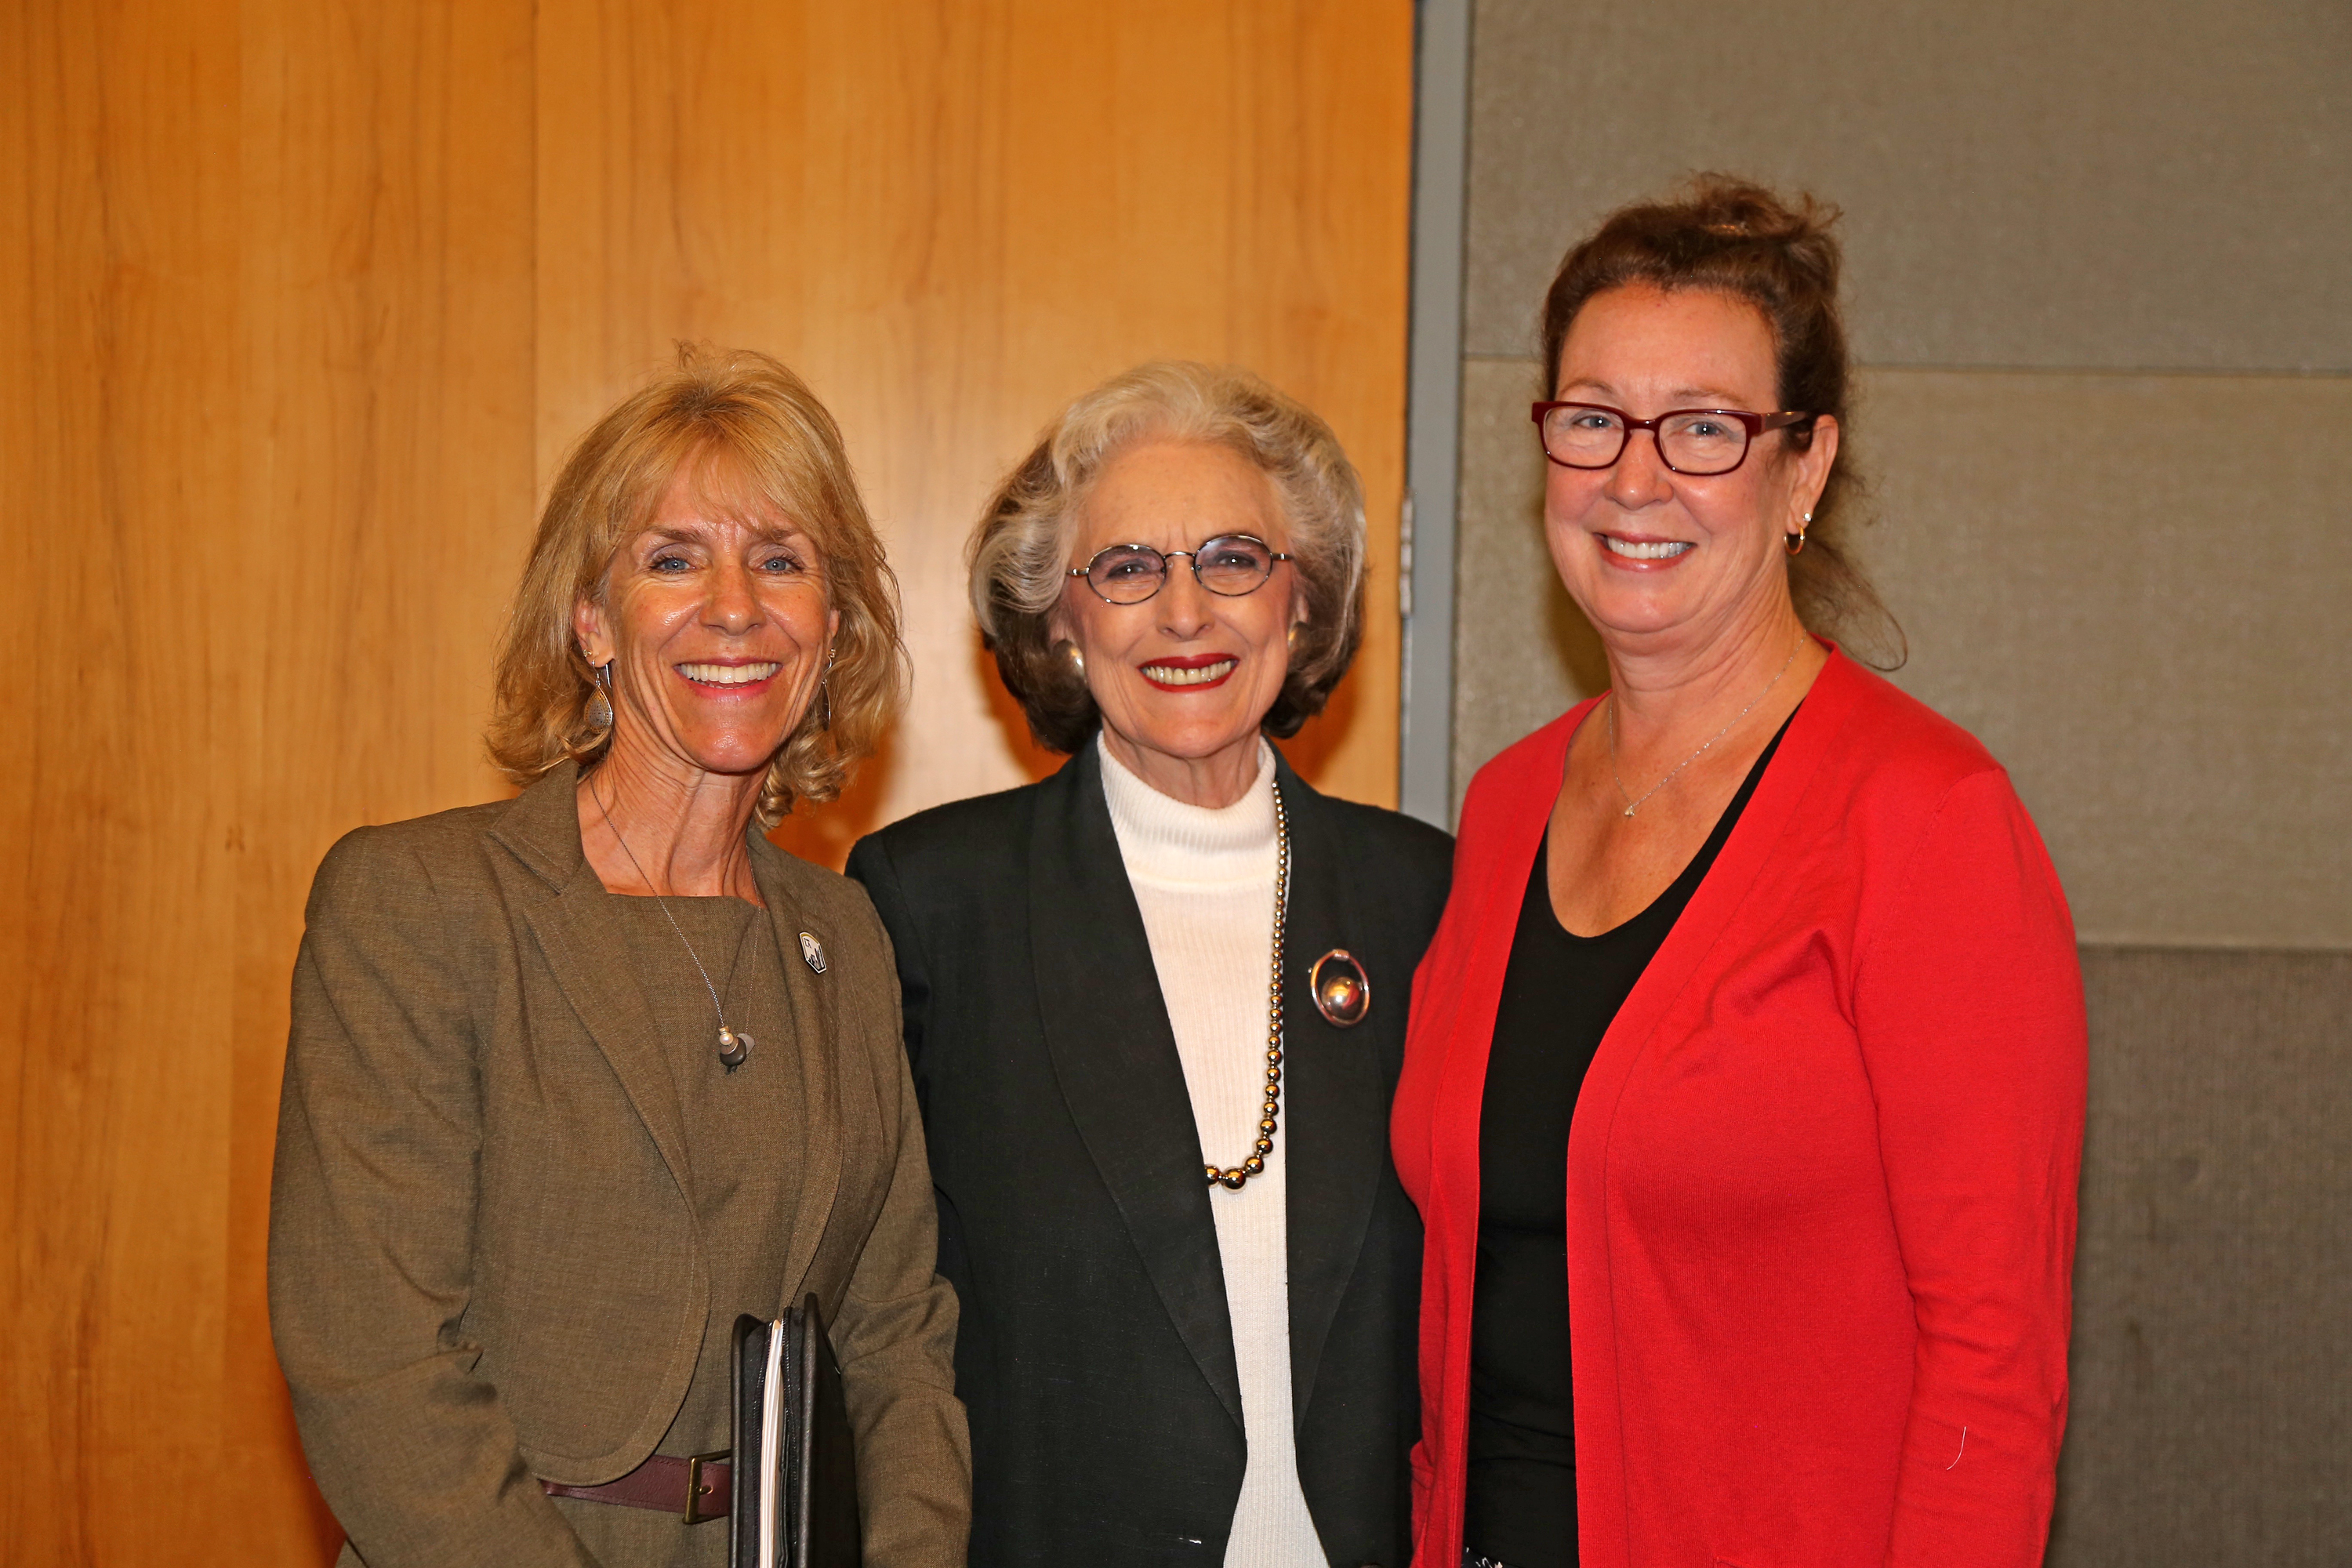 Janet Doal, Beatriz Yorker and professor at Fall 2017 Luncheon